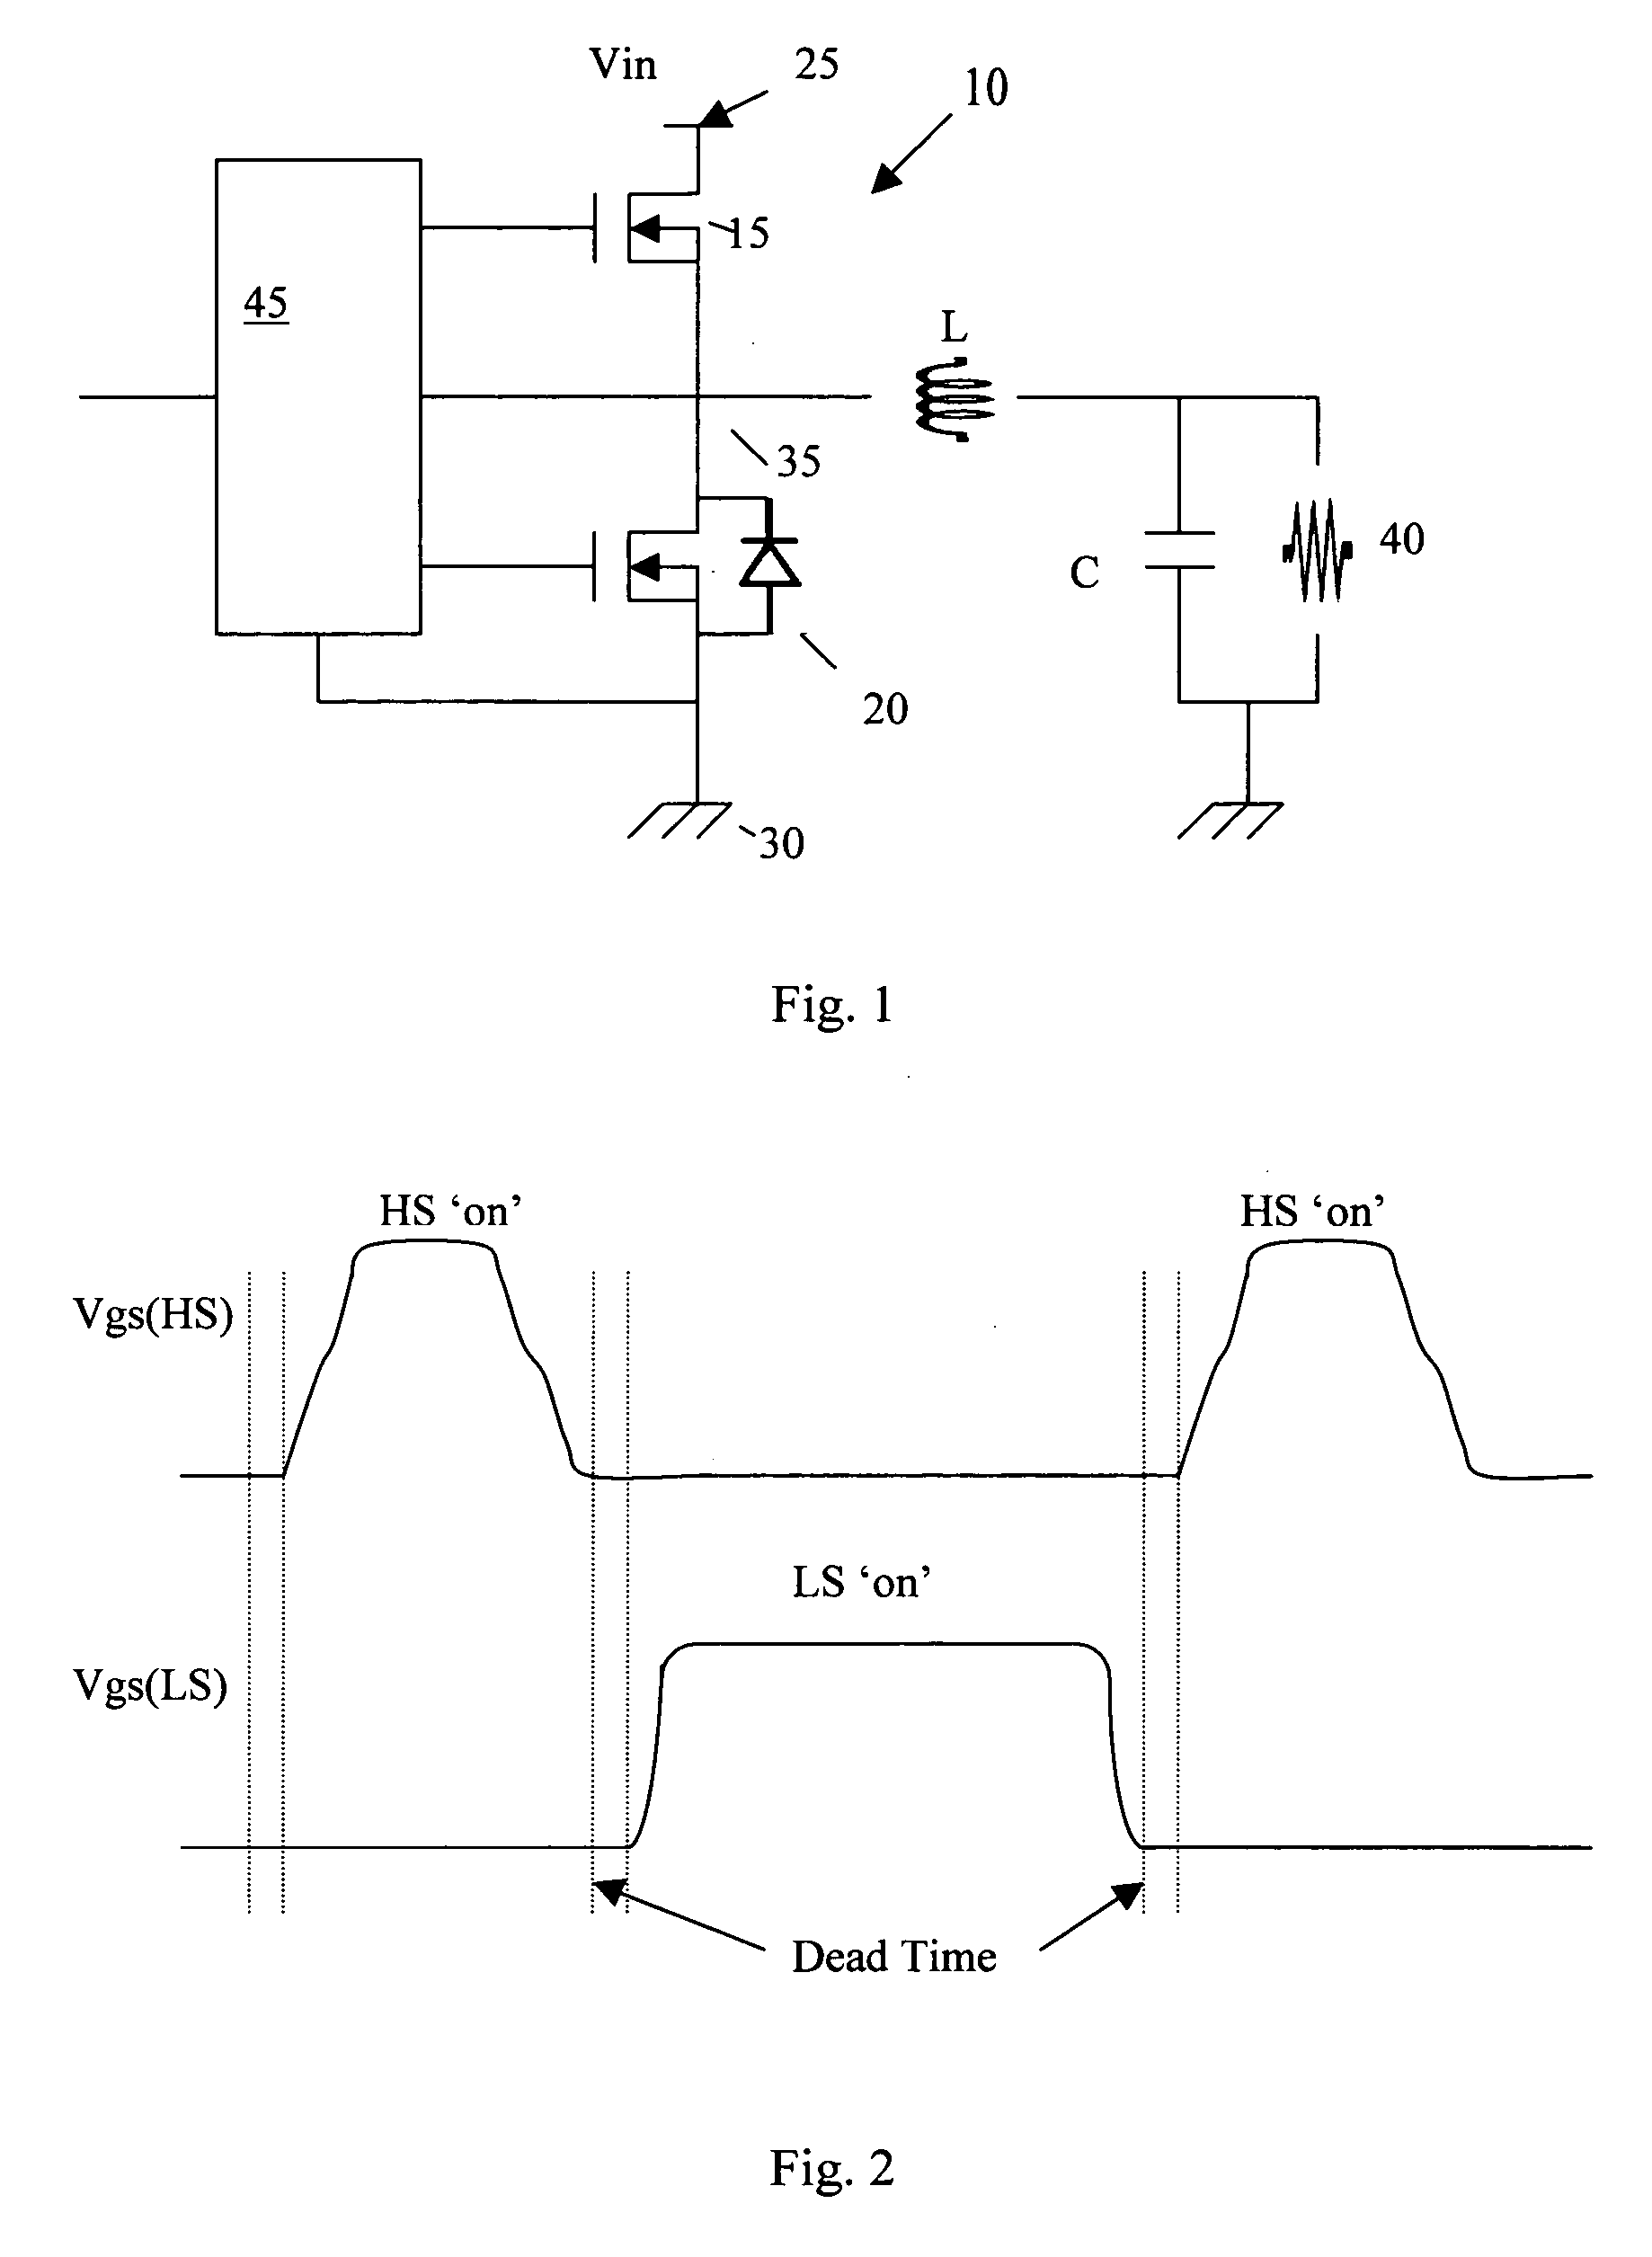 MOSFET using gate work function engineering for switching applications